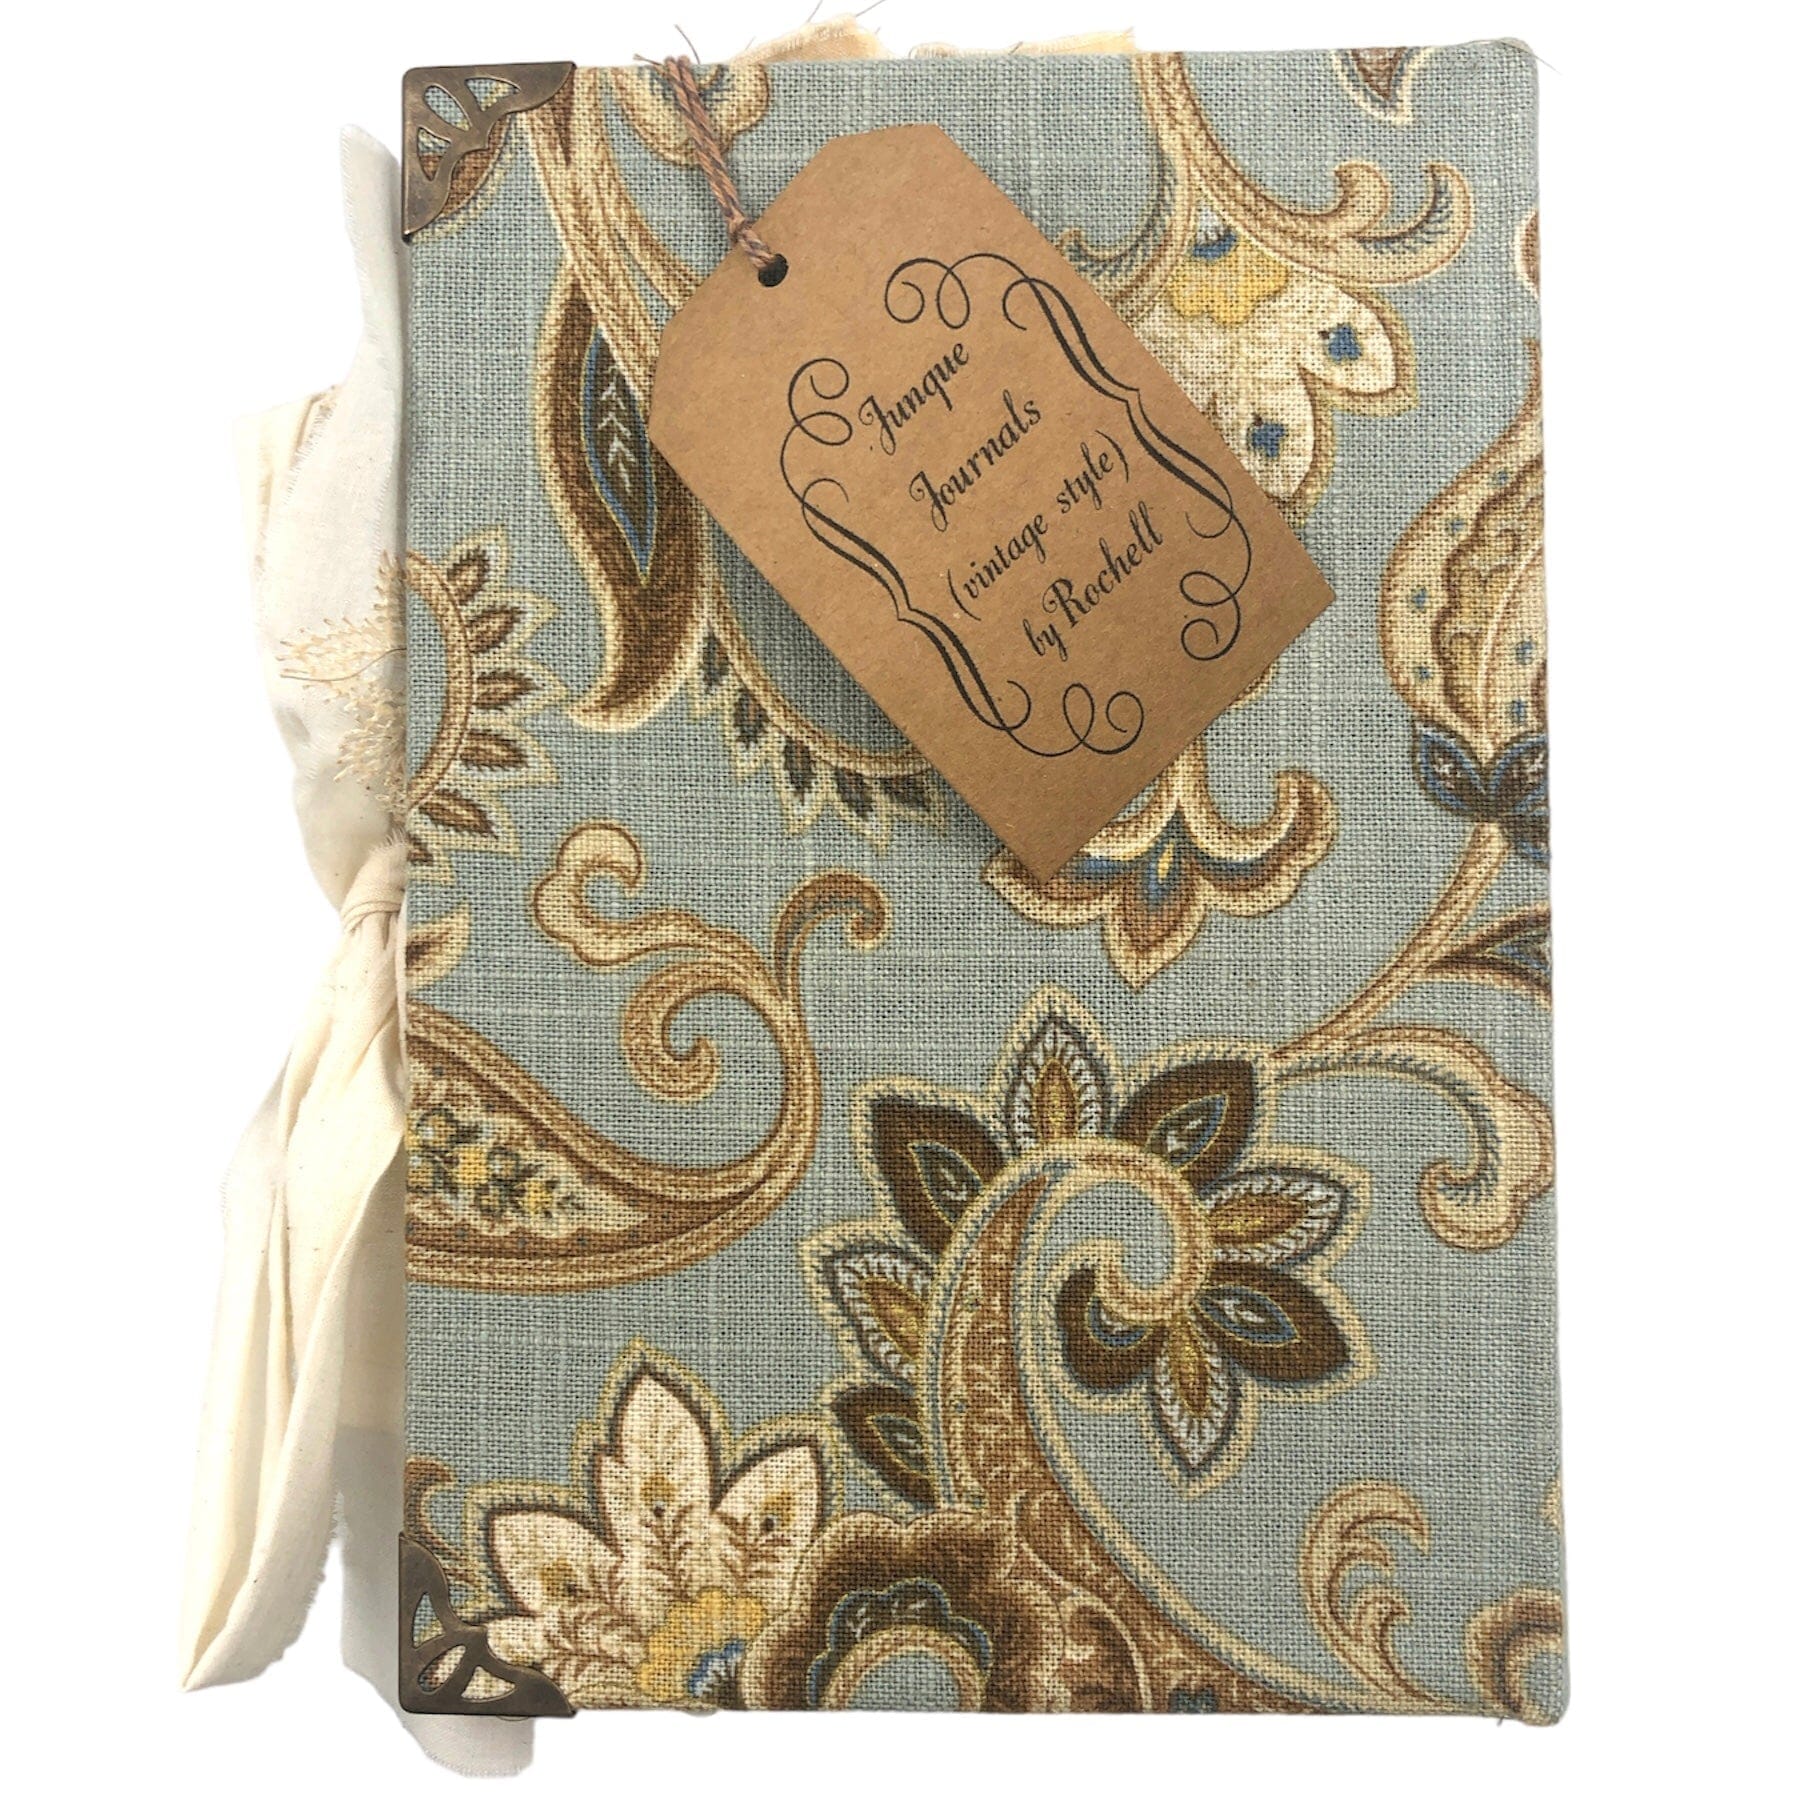 Teddy Bear Journal - Large Fabric Covered and Includes Tassel - Five and Divine